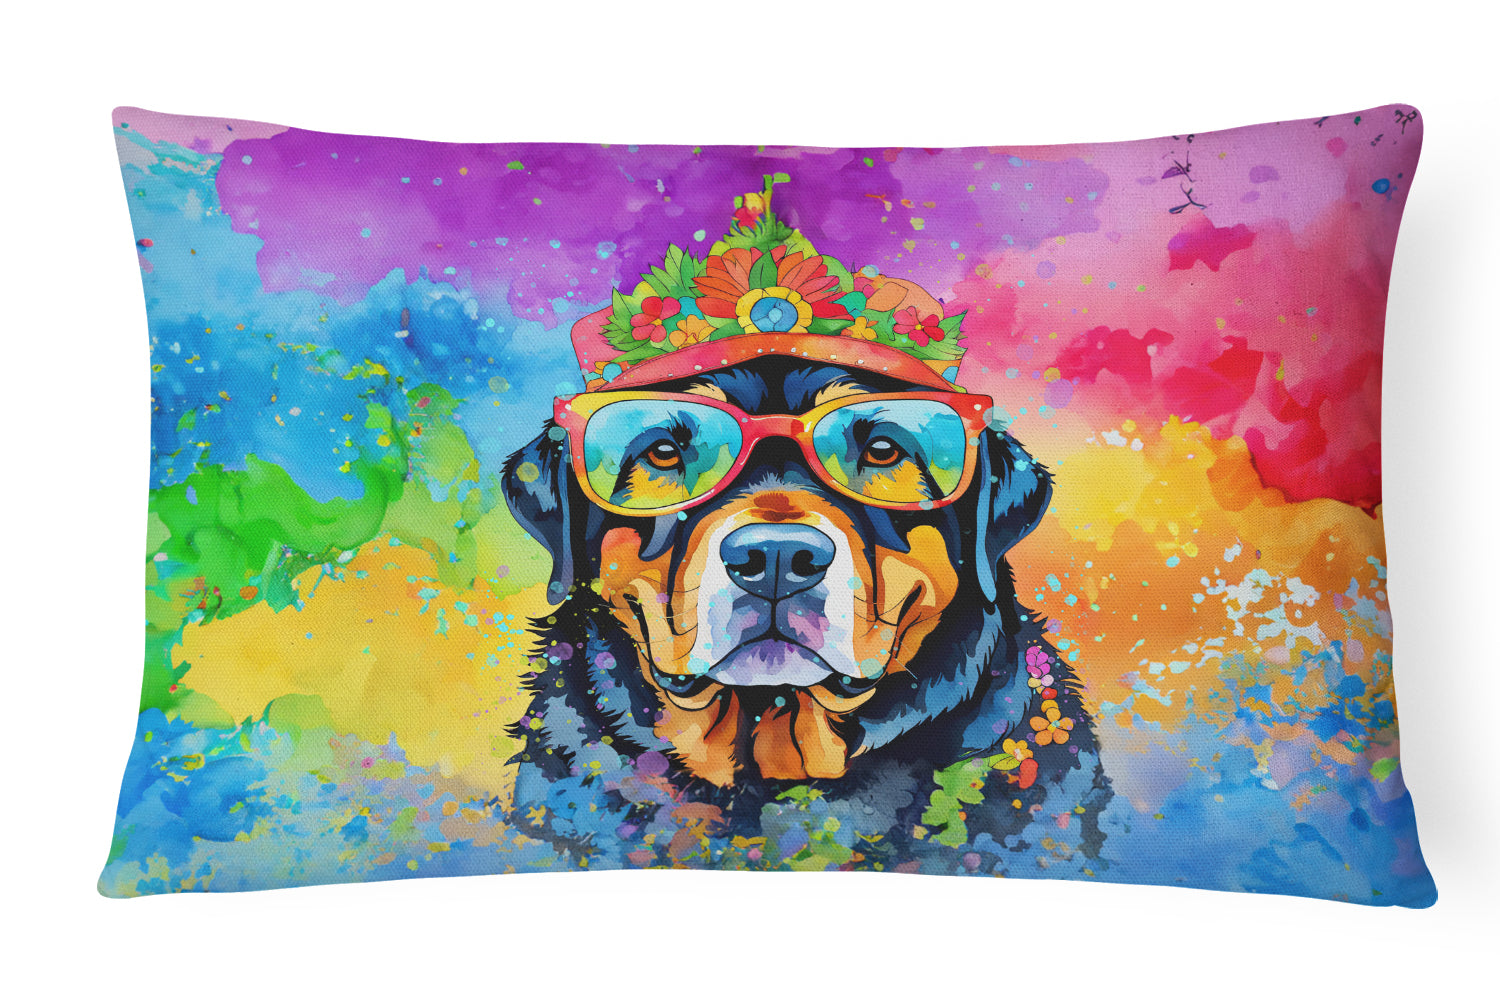 Buy this Rottweiler Hippie Dawg Fabric Decorative Pillow